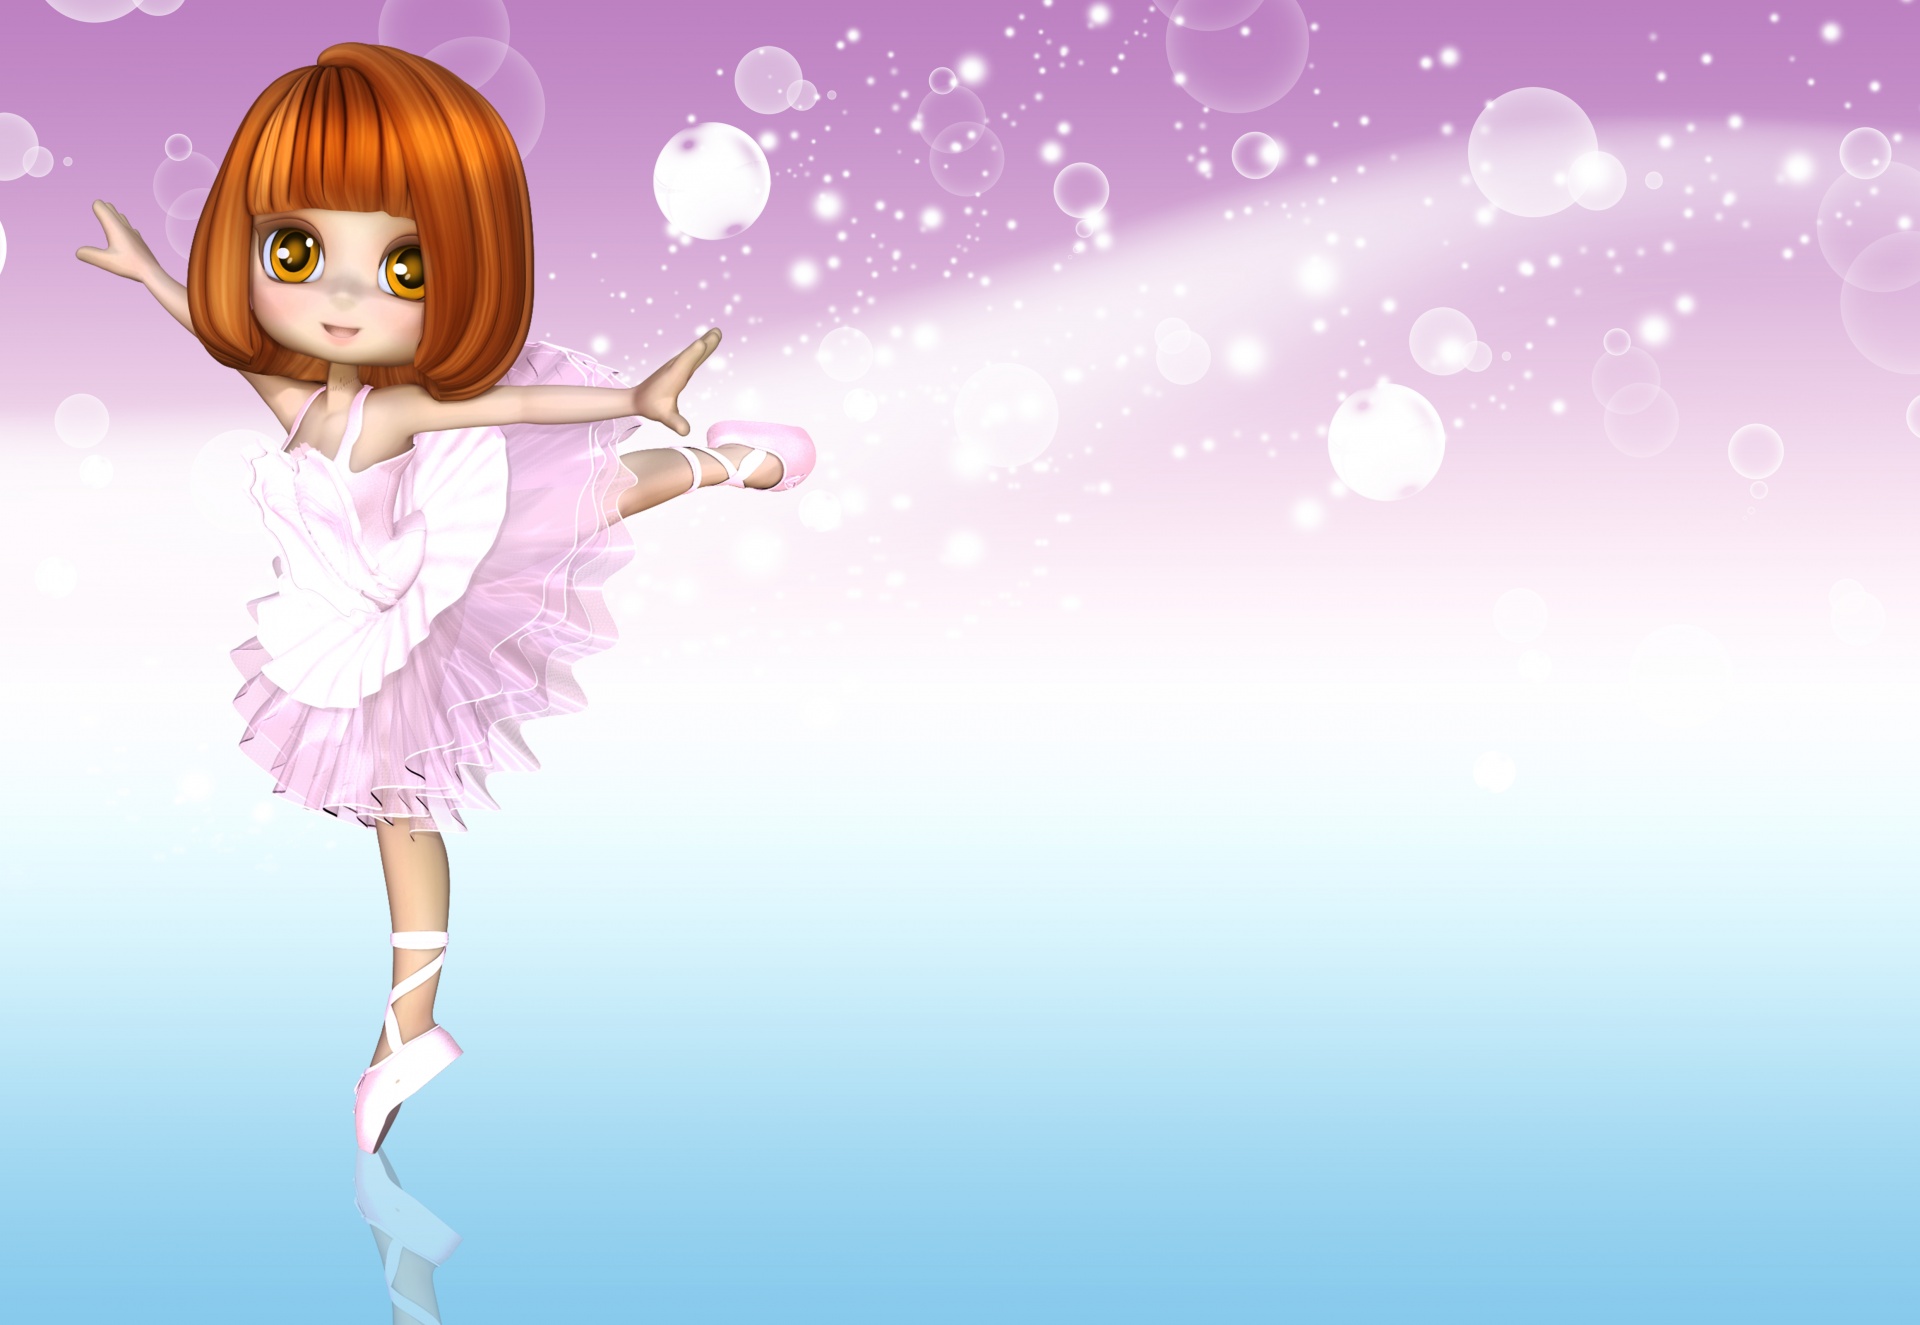 Ballet Background And Image